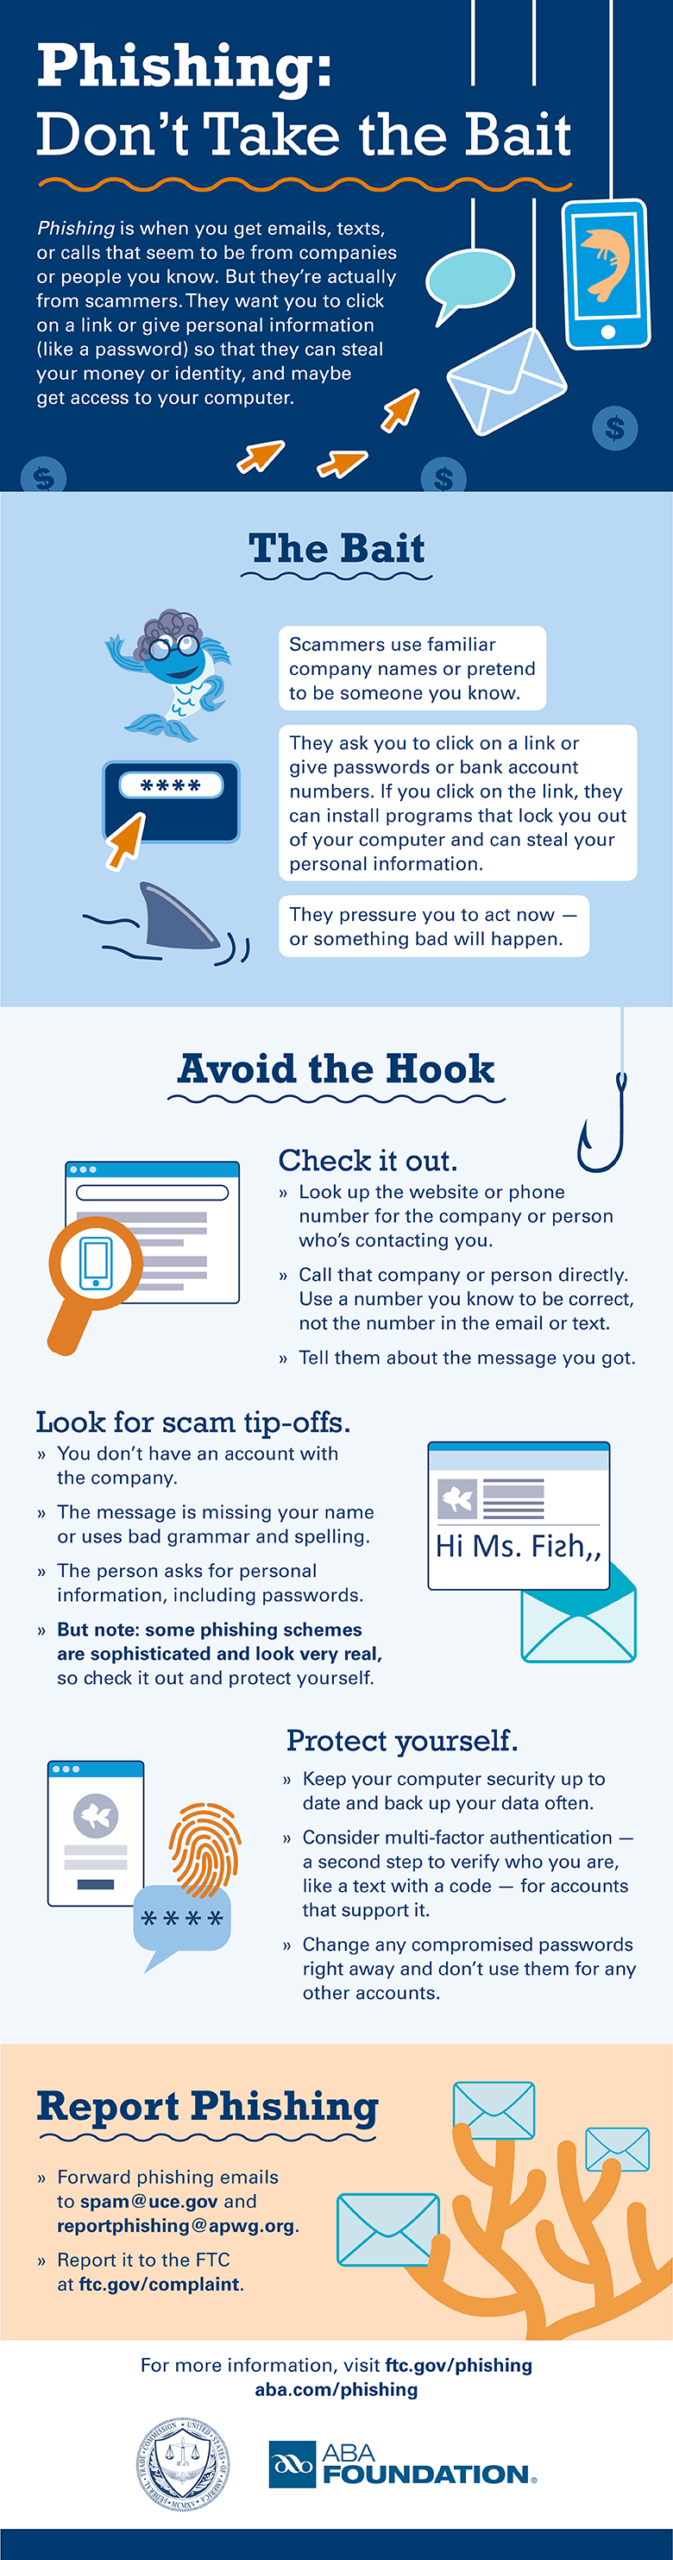 Email Phishing Scams - Don't Take the Bait, by Biology of Technology